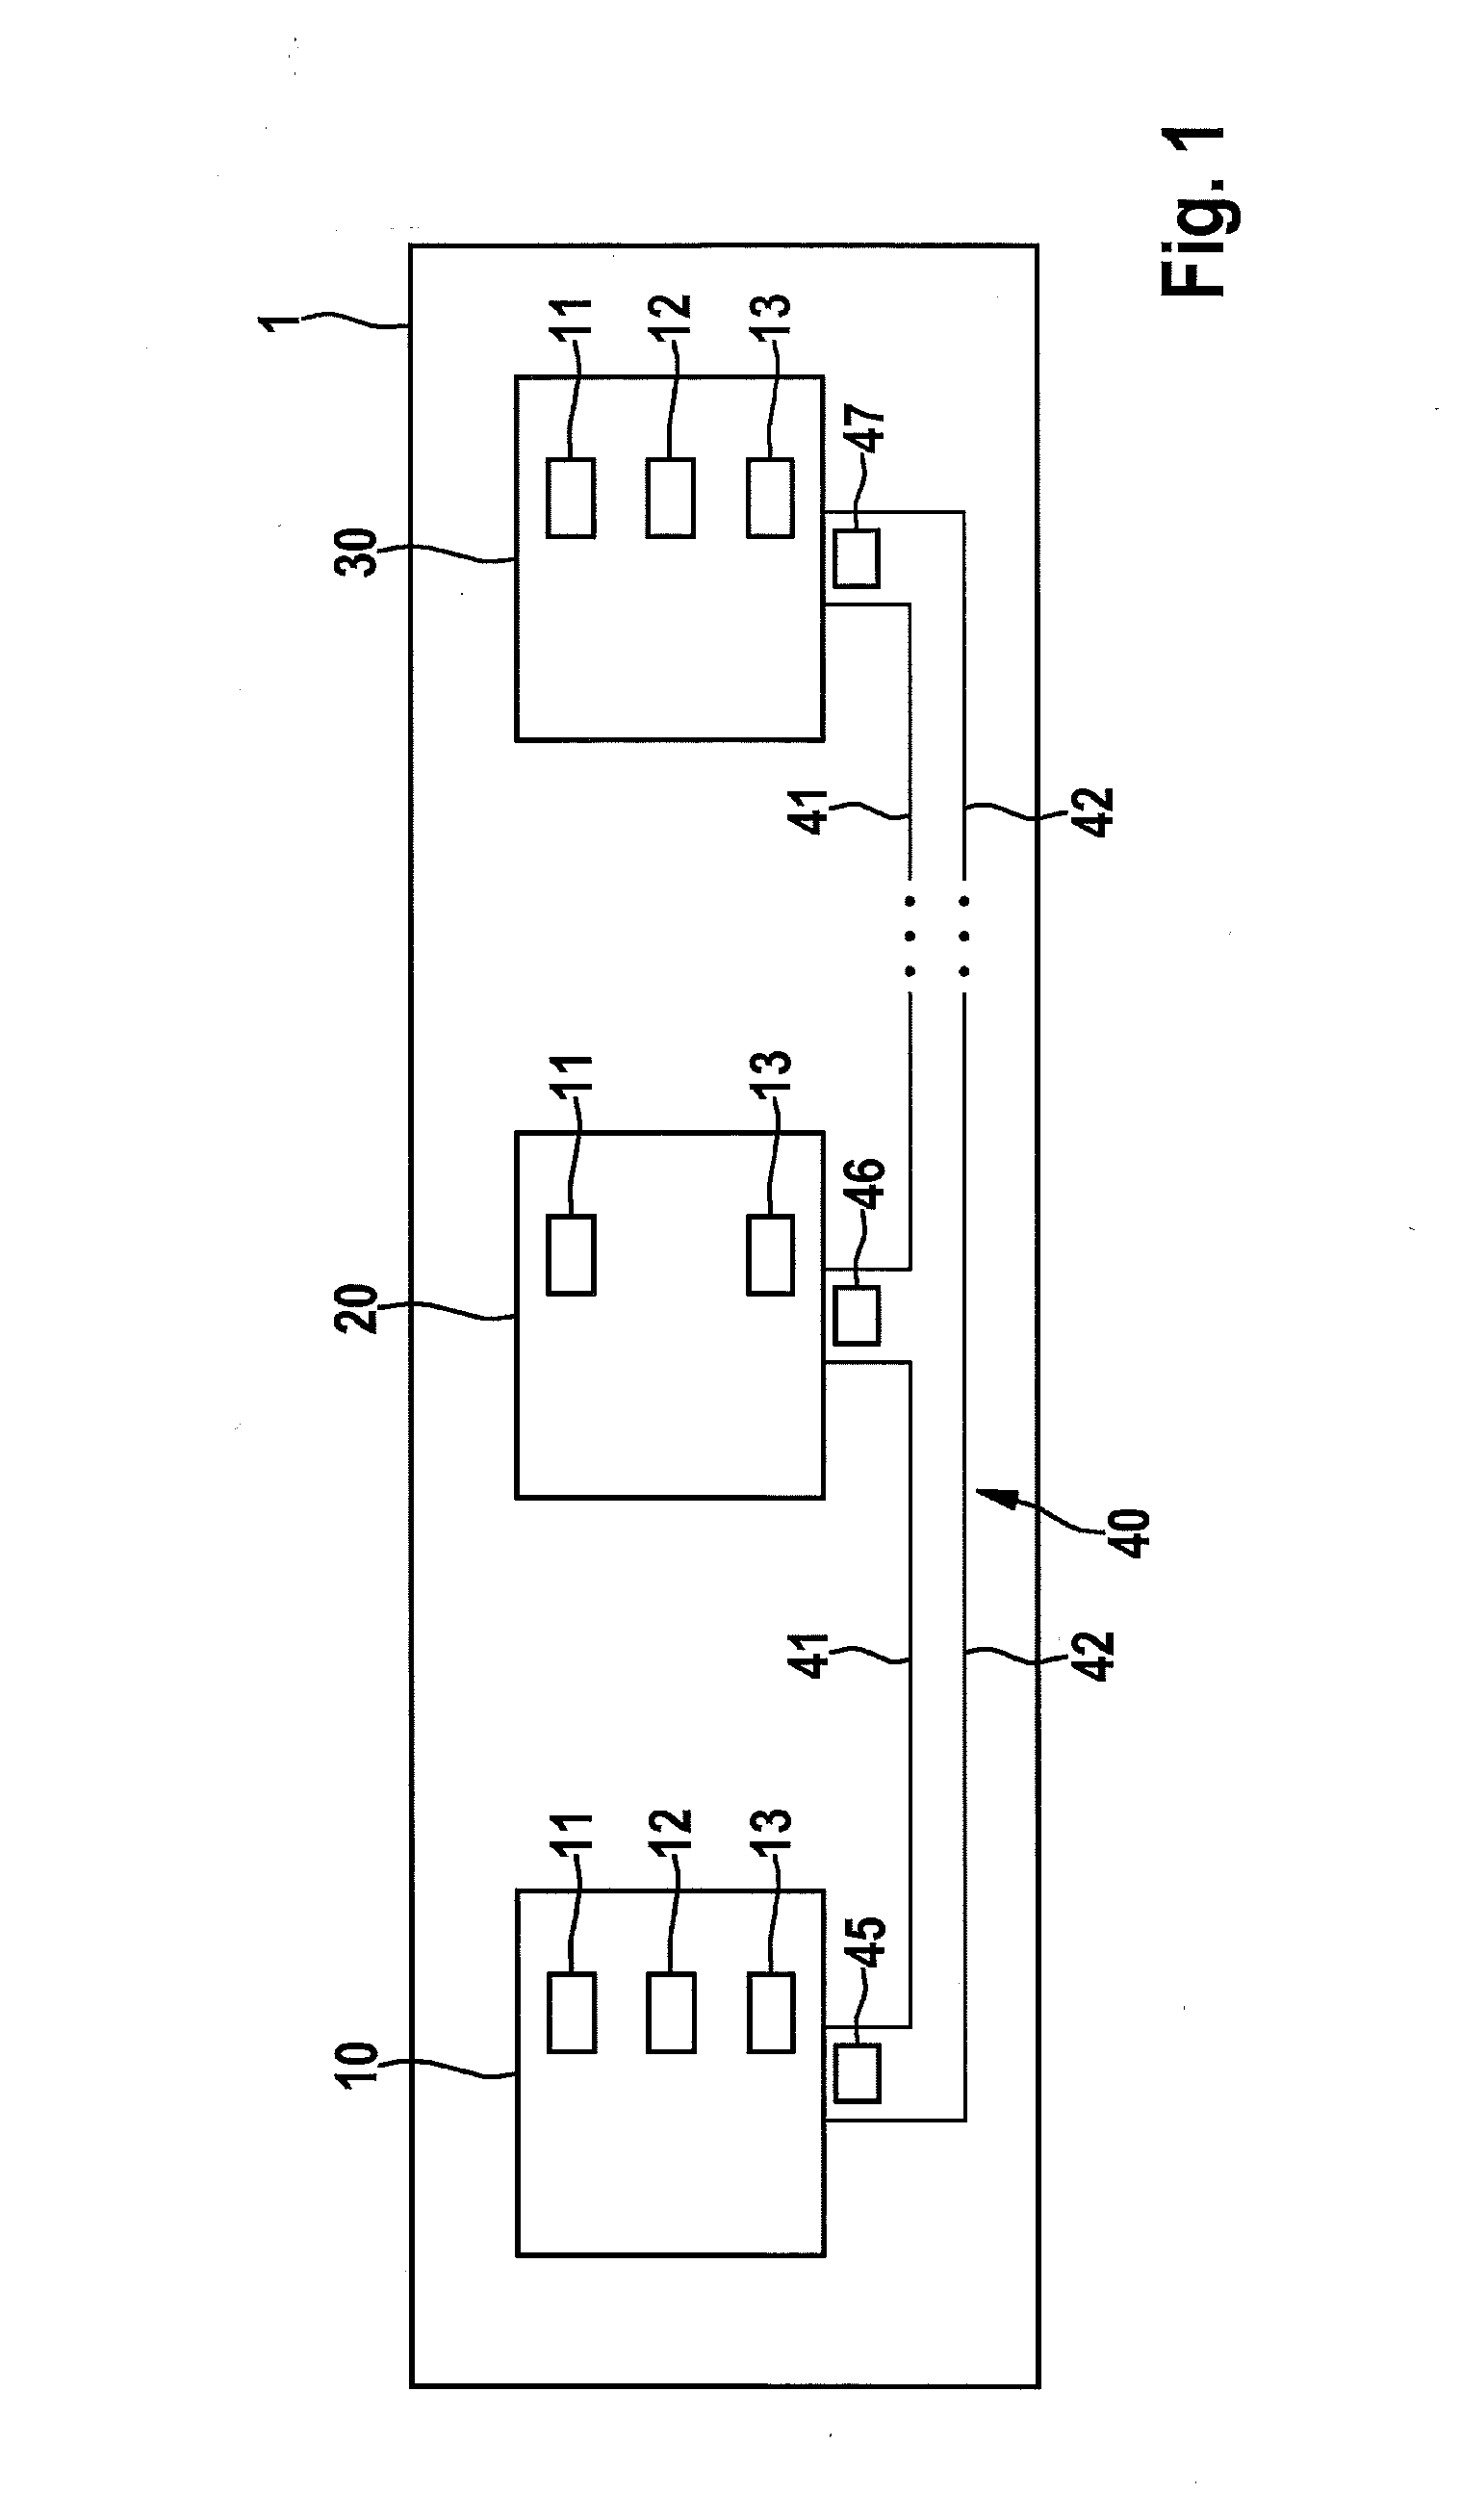 Subscriber station for a bus system and method for improving the error tolerance of a subscriber station of a bus system